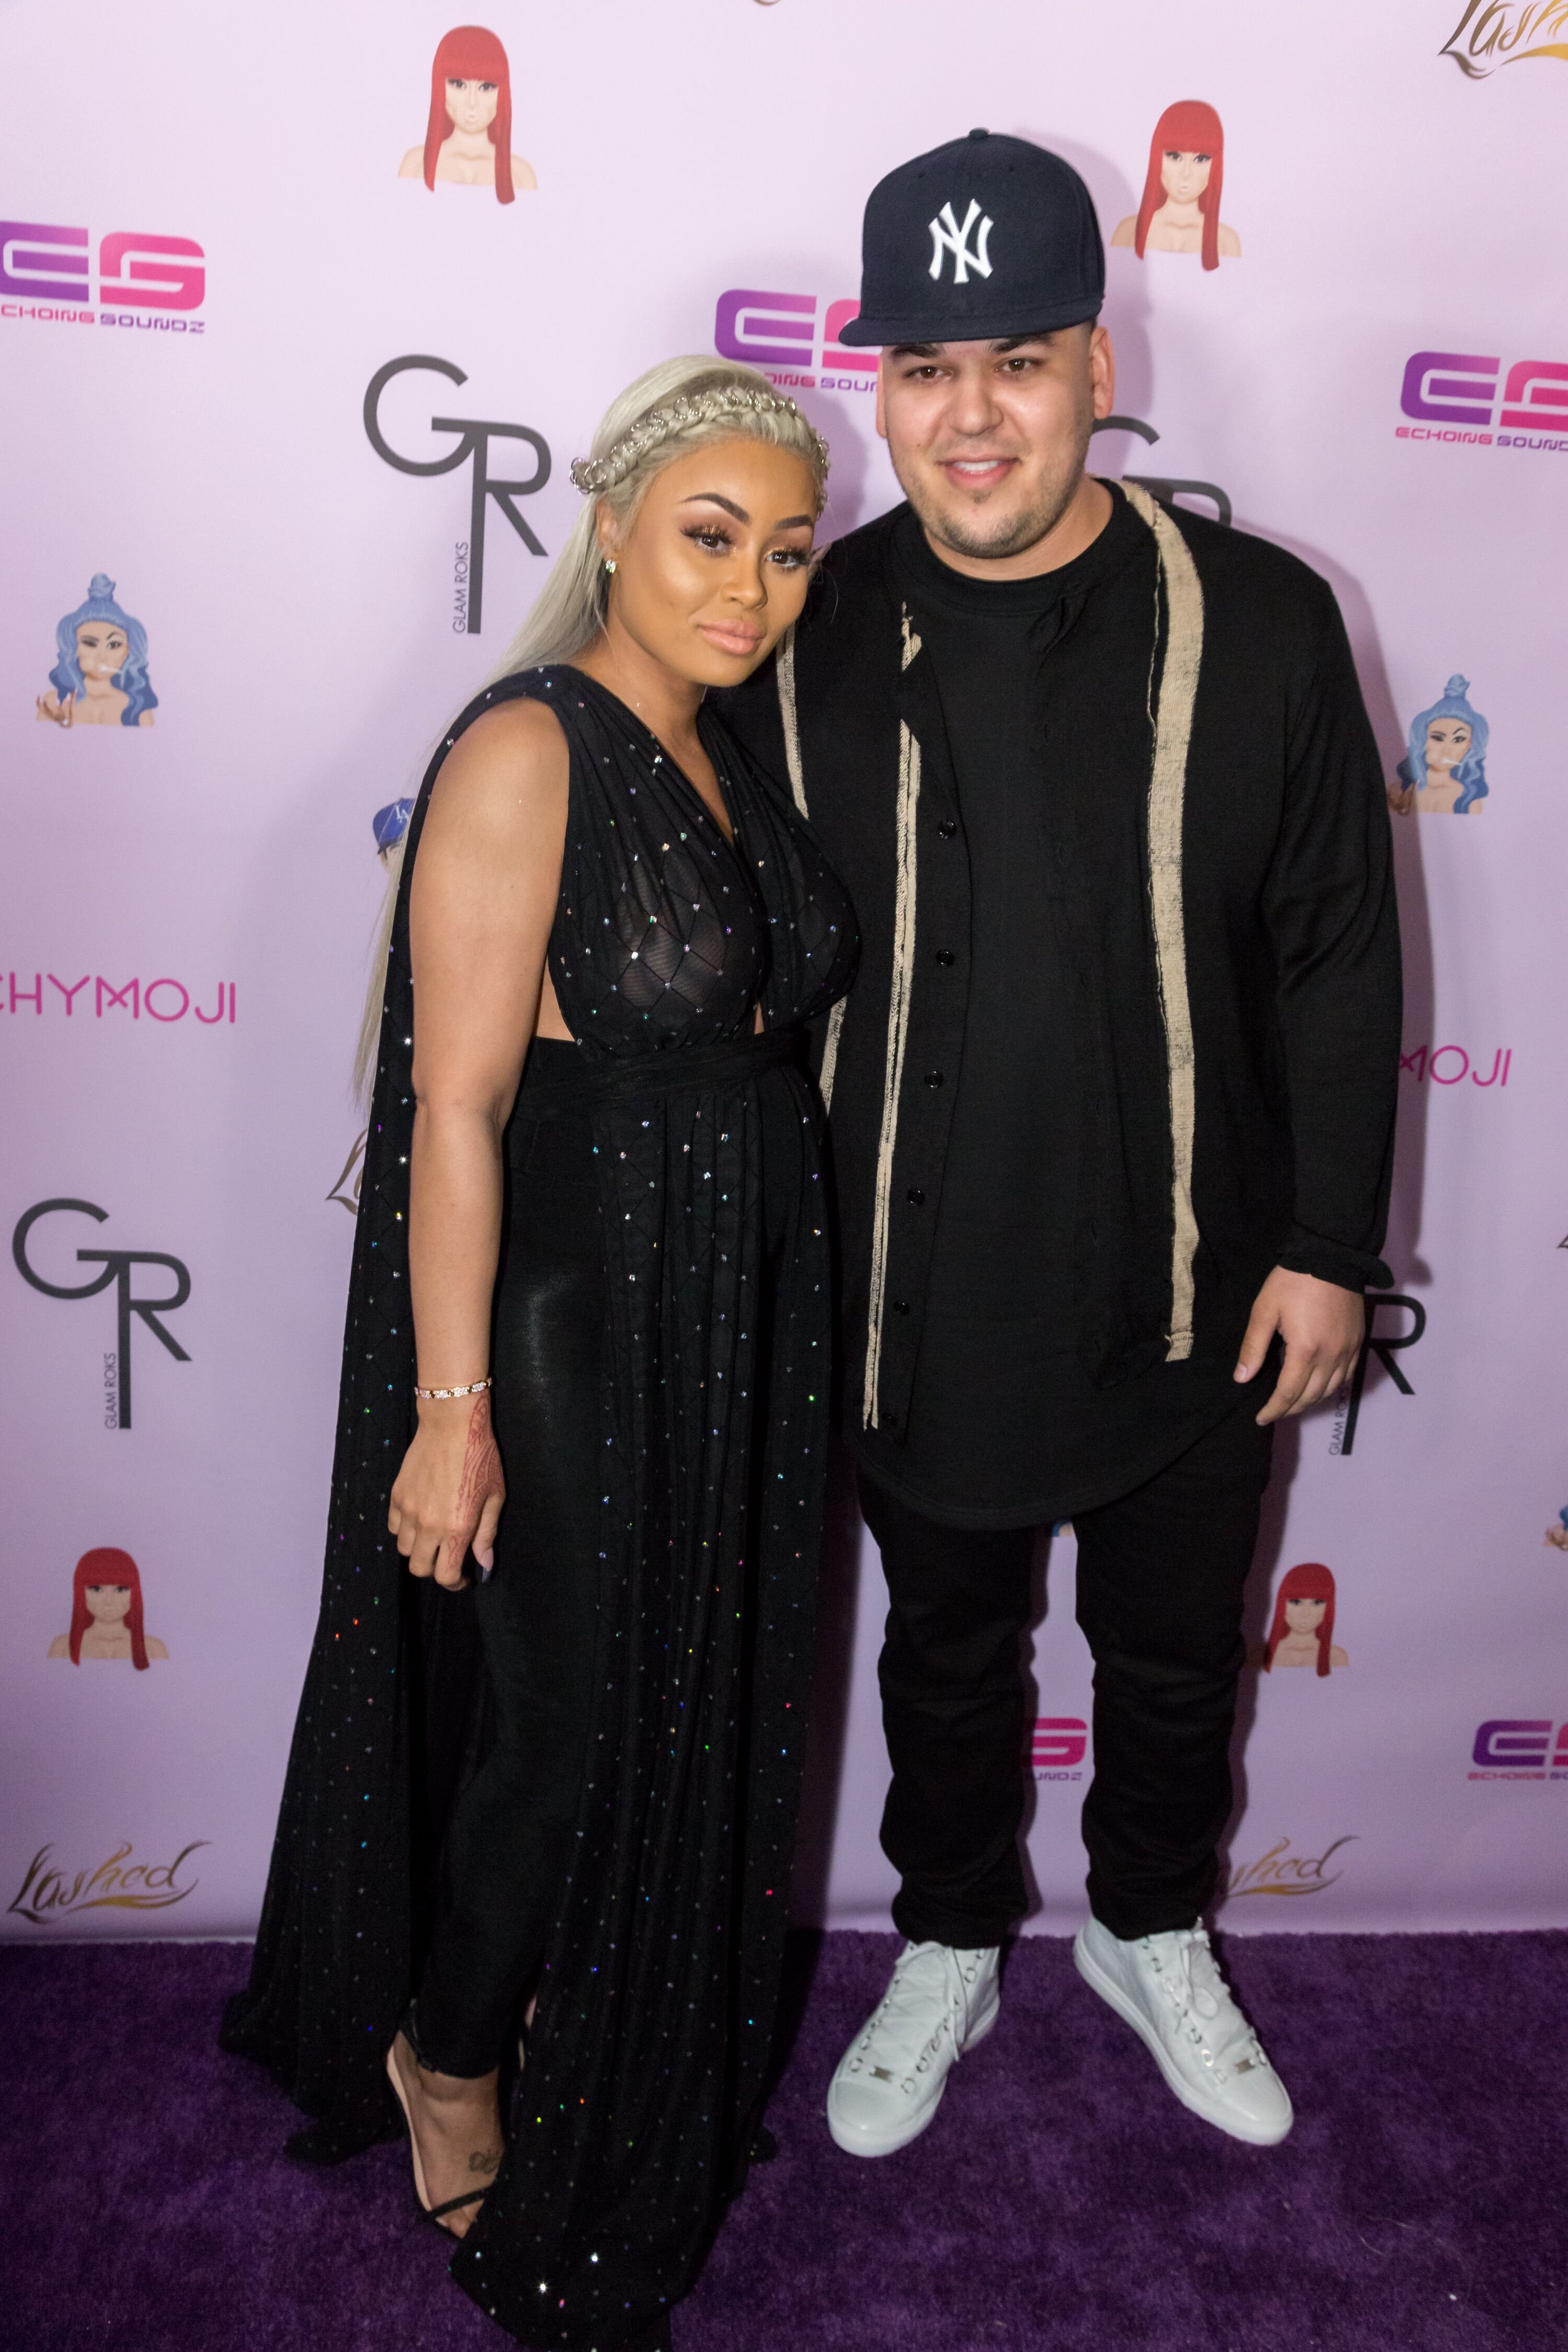 Rob Kardashian and Blac Chyna at a public guesting | Source: Getty Images/GlobalImagesUkraine